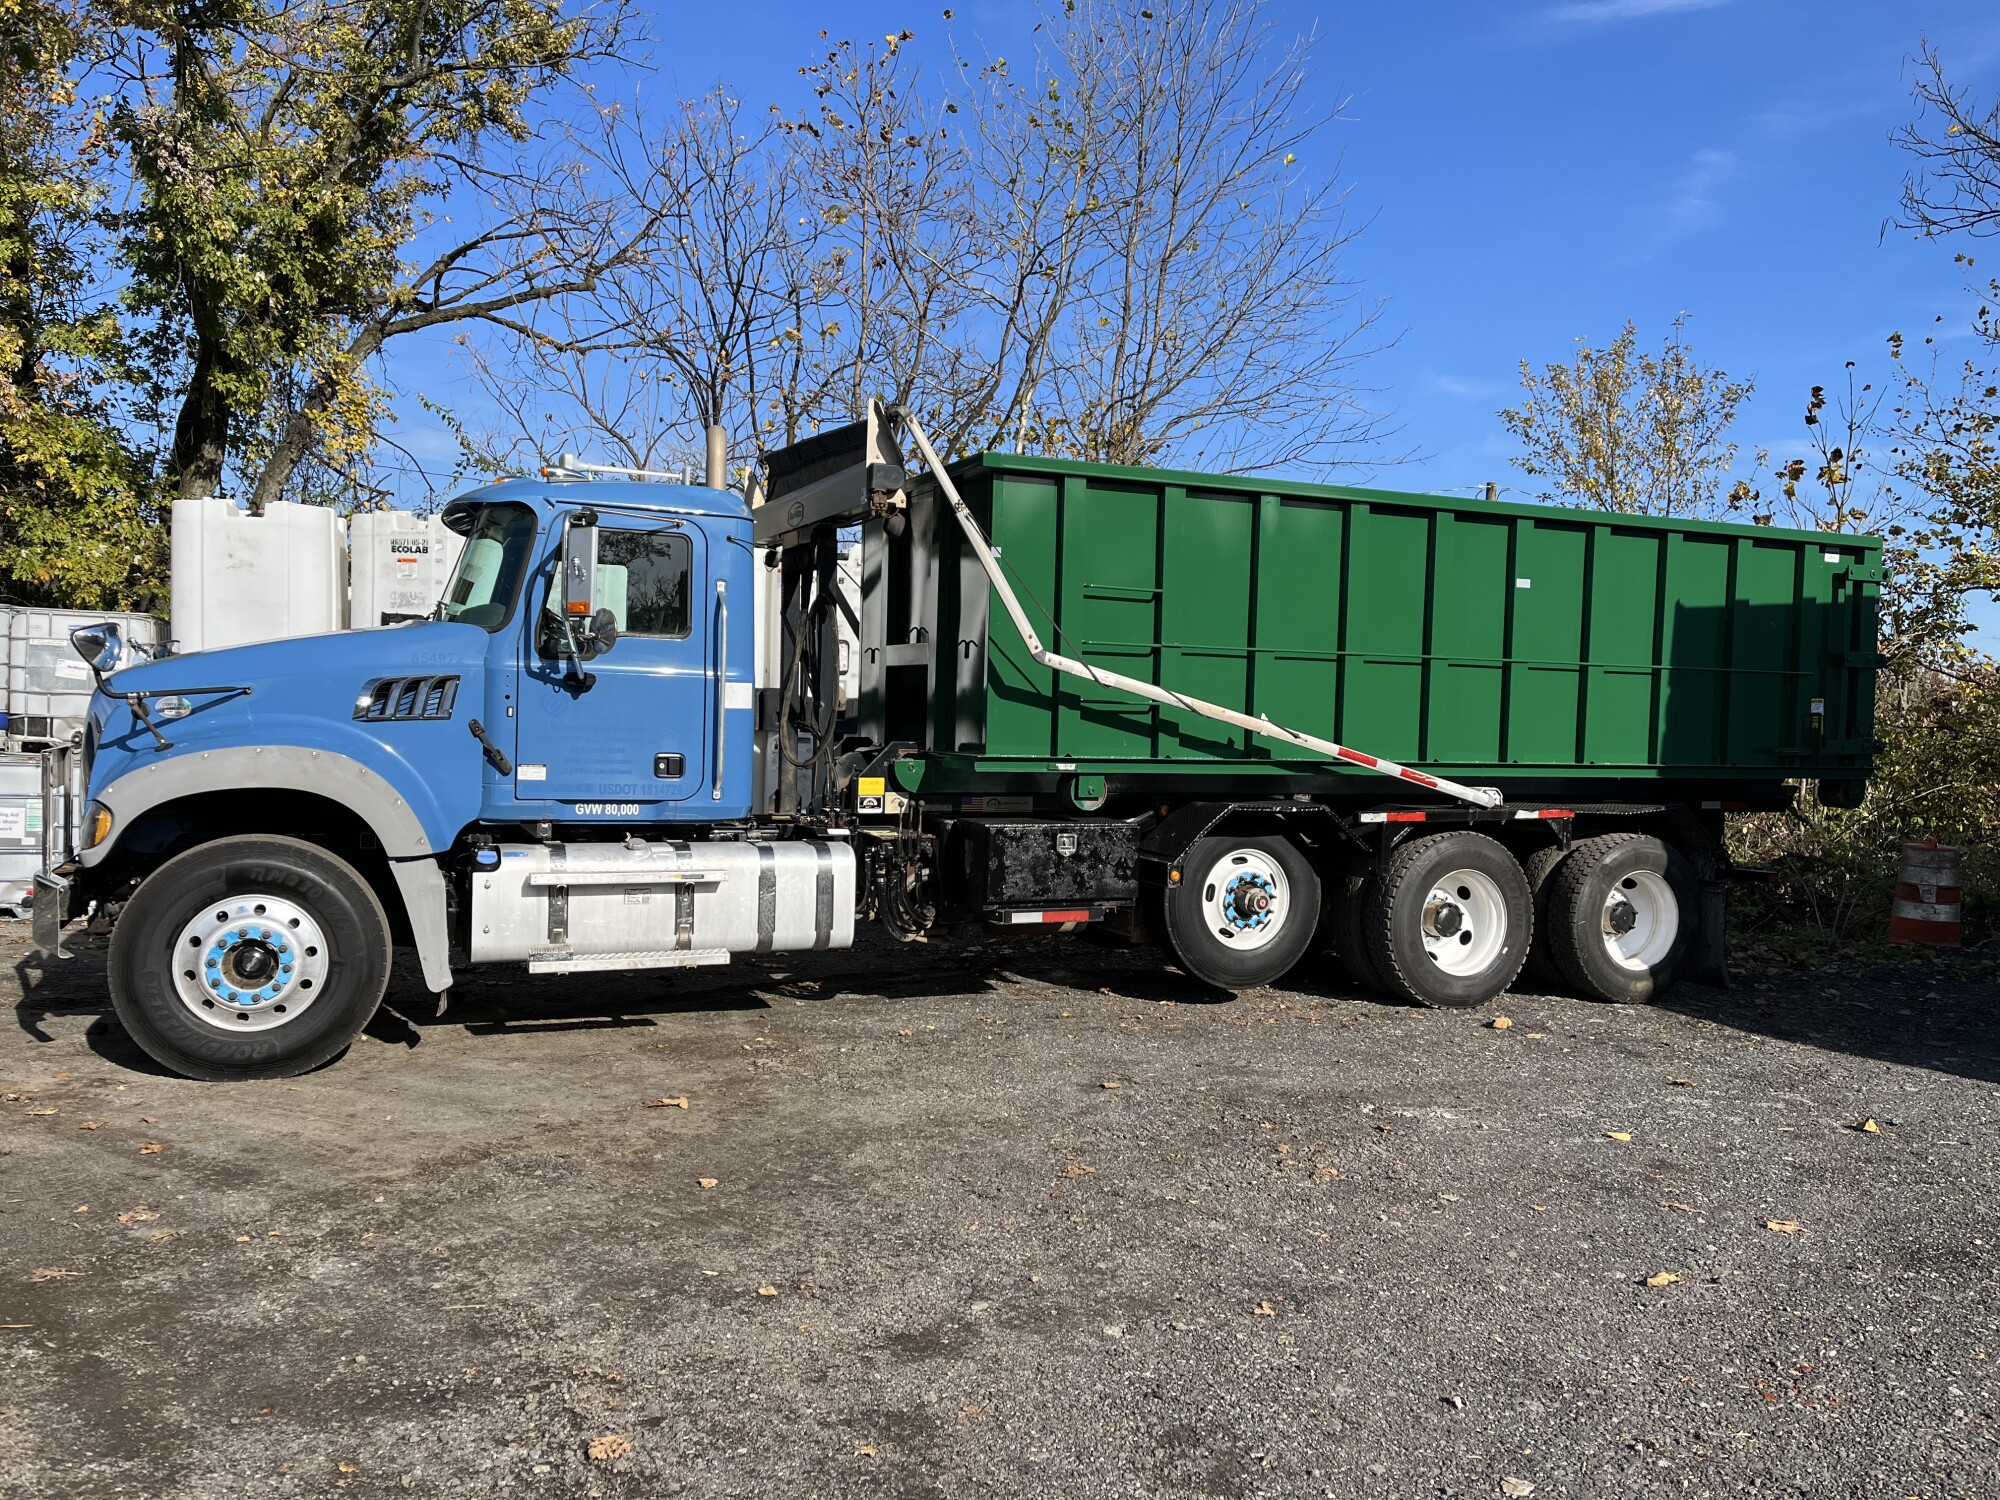 Cheap Dumpster Rental in Collegeville, PA